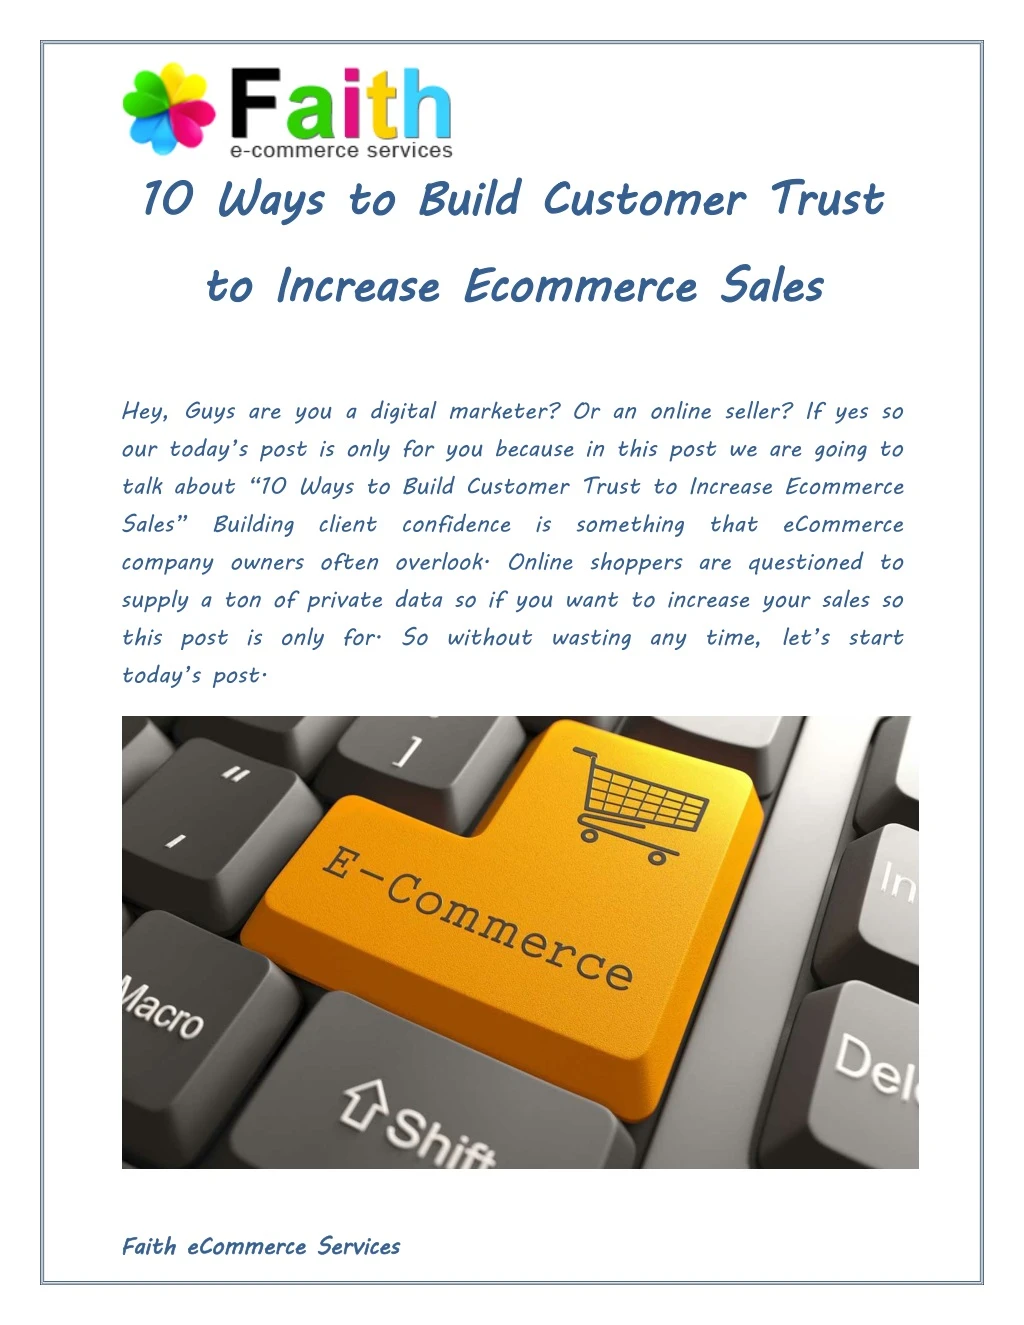 10 ways to build customer trust to increase